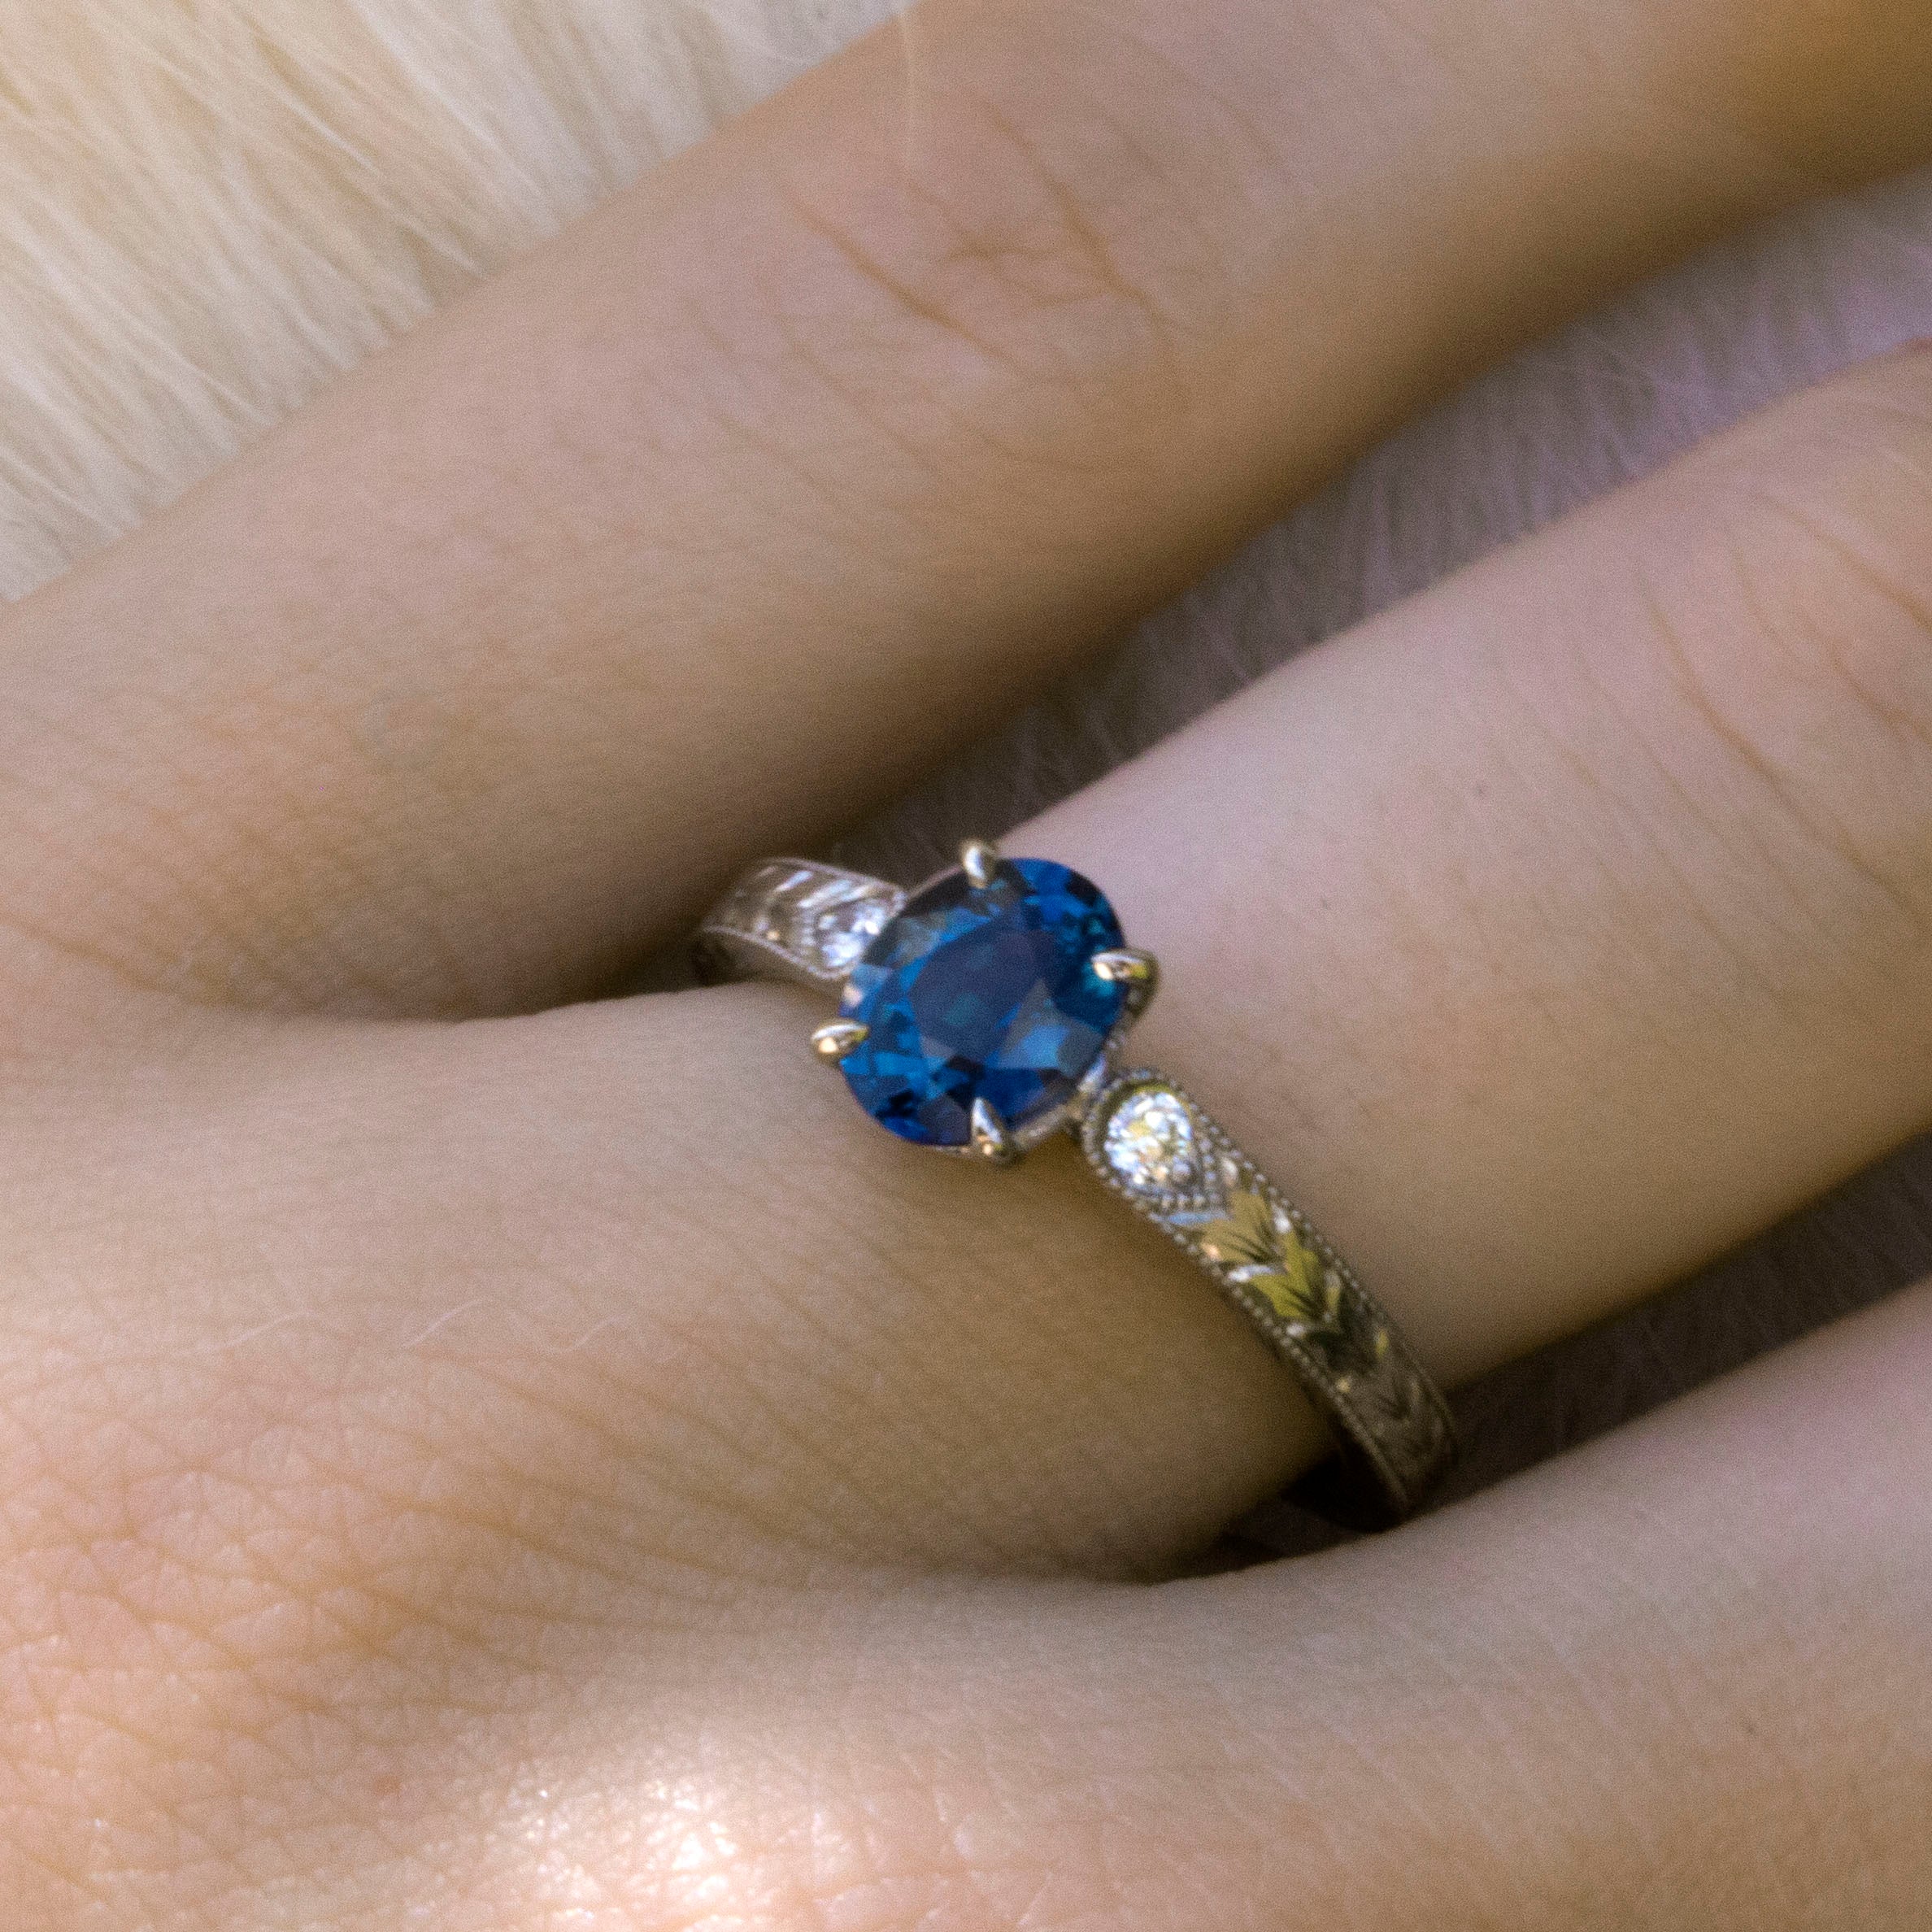 blue sapphire and diamond engraved engagement ring on hand